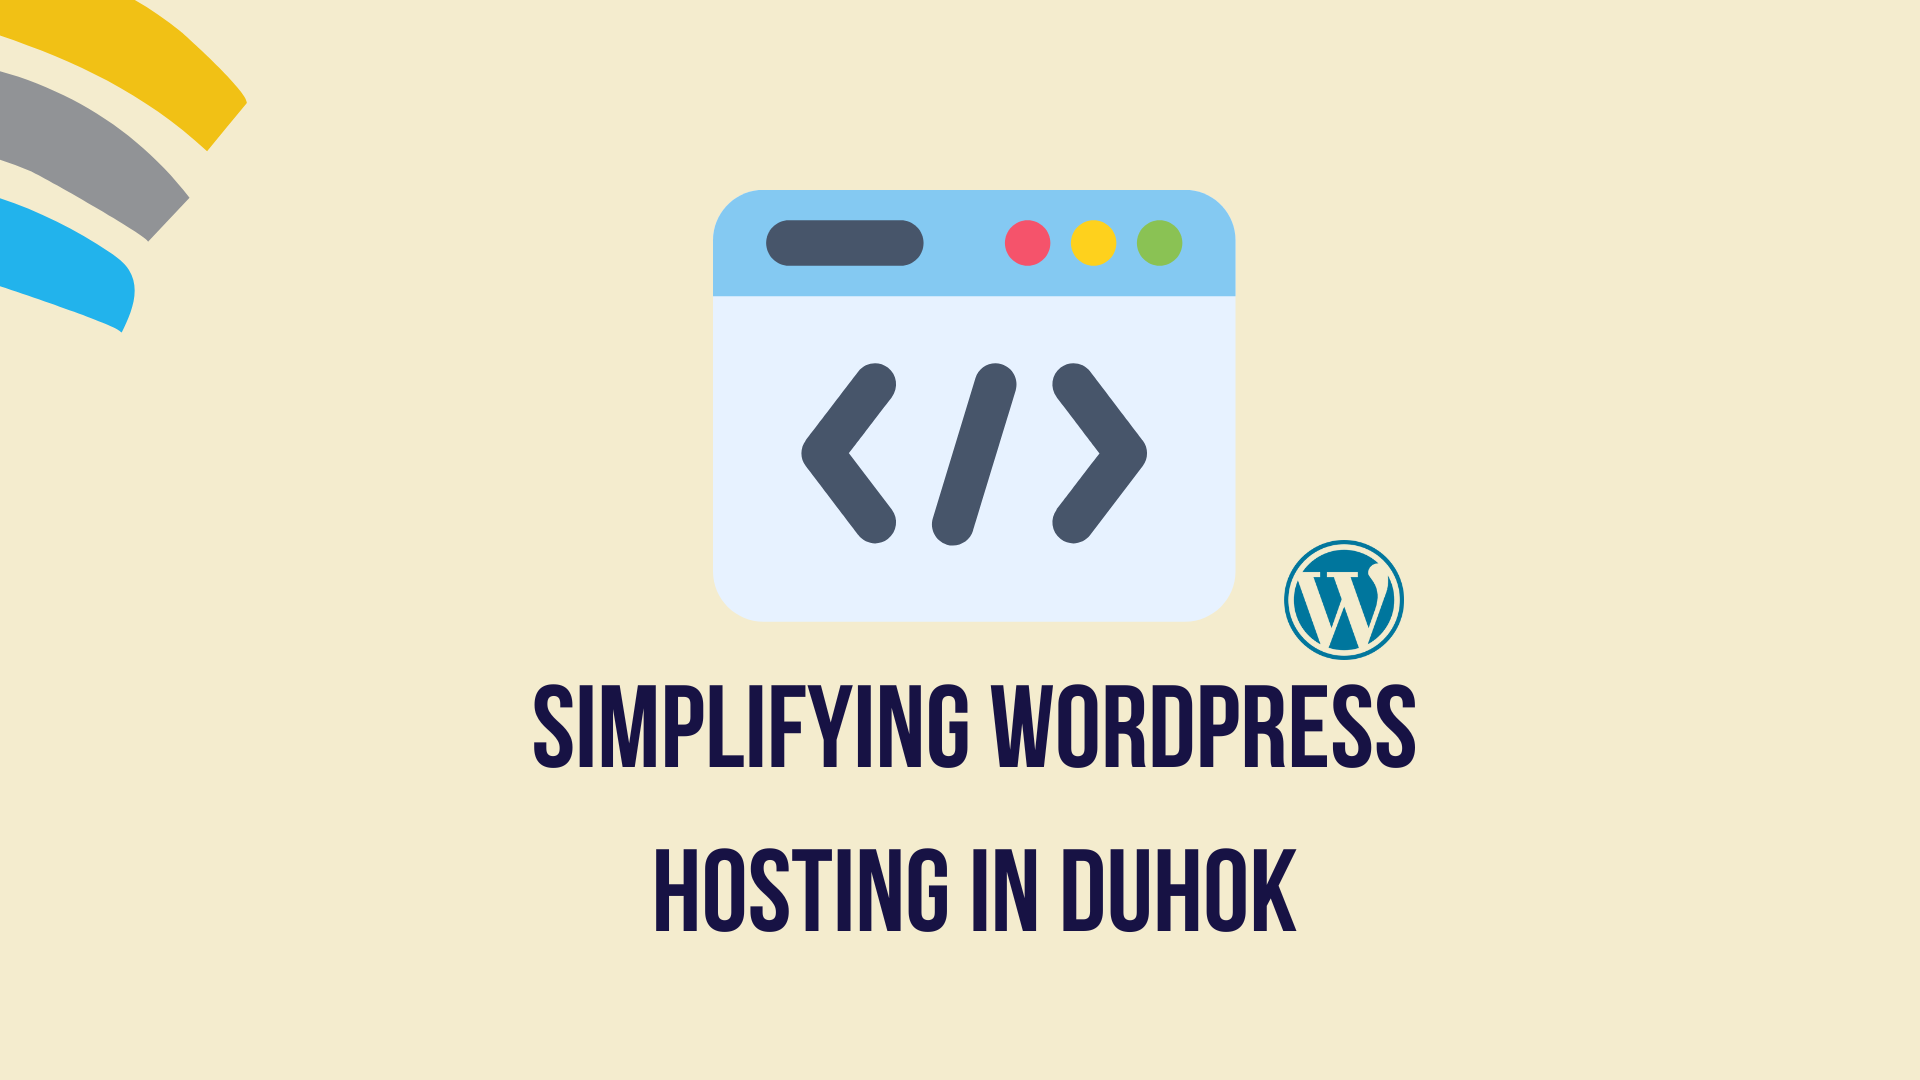 Simplifying WordPress Hosting in Duhok, Kurdistan: Local Support and Payments with LinkData.com